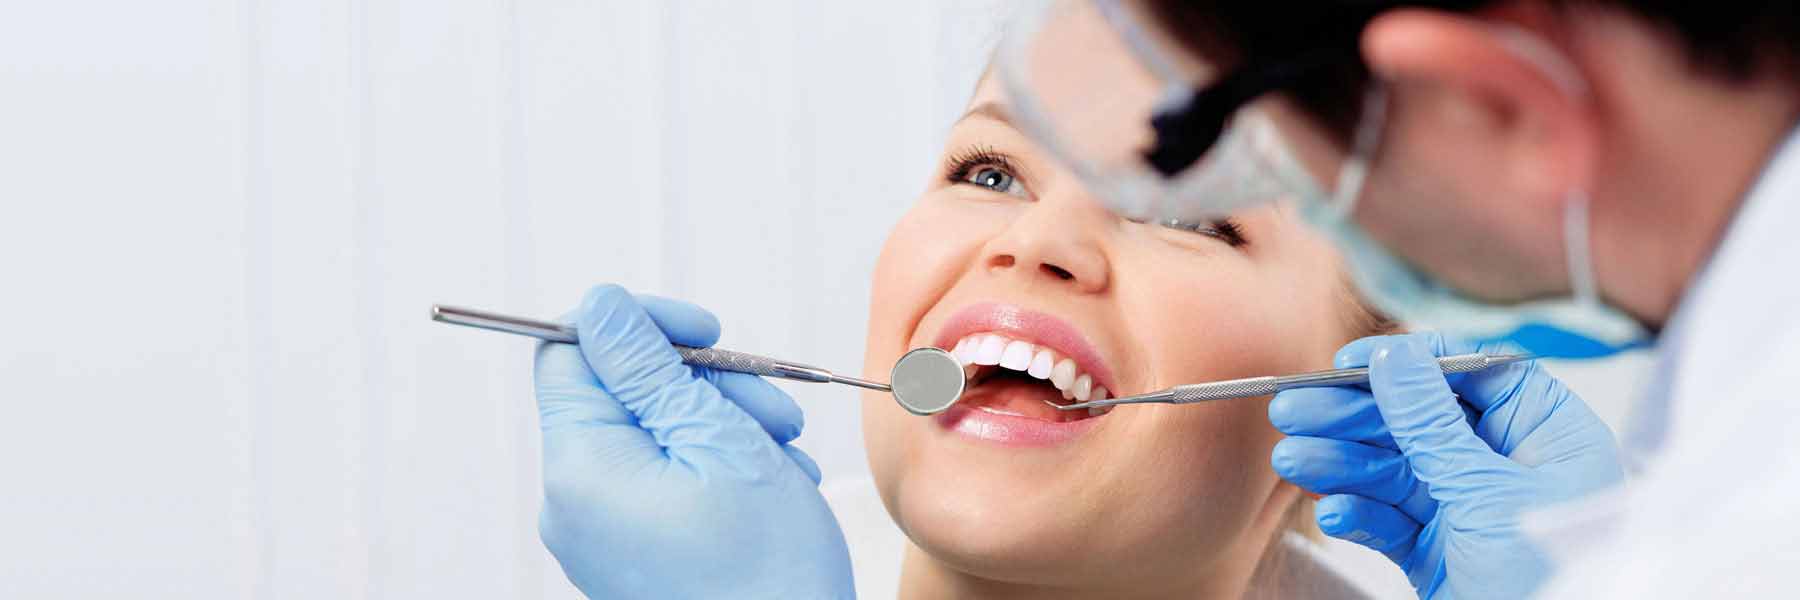 Dental Service in Ashtonfield - Tooth N Care